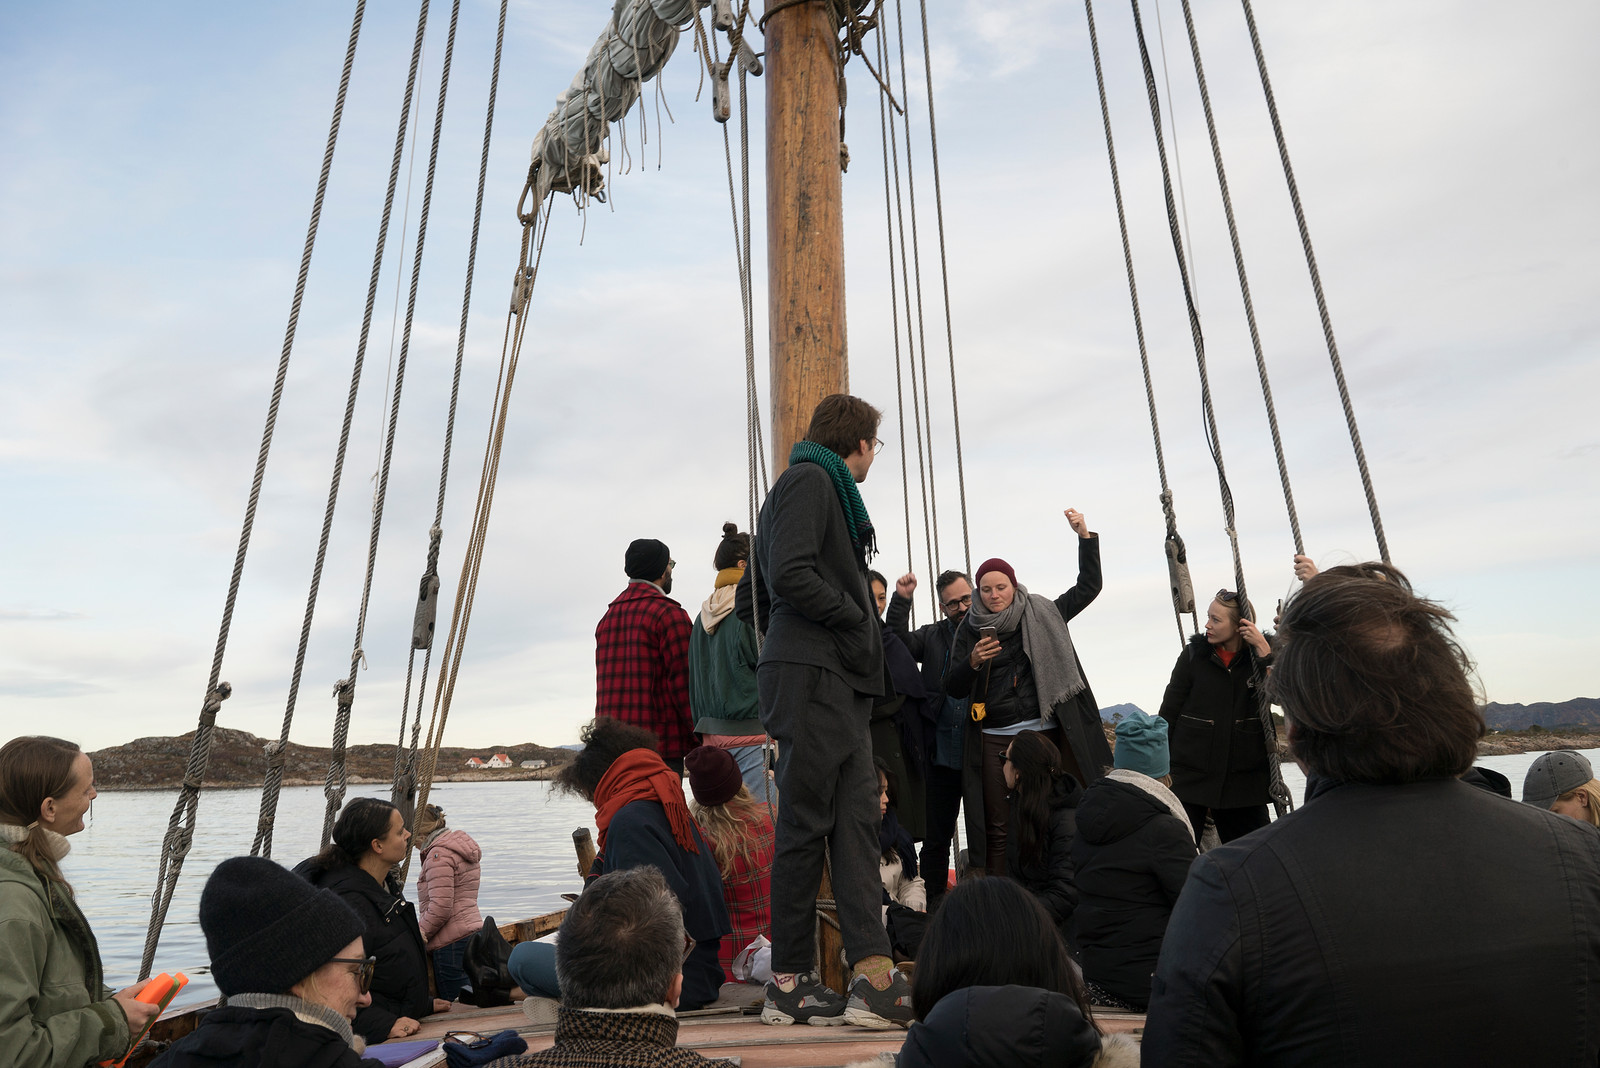 "EVERYBODY READS FISHING" a participatory performance on a boat in Hustadvika/Håholmen, by curator Valentinas Klimasauskas (Lithuania) during Coasts third edition "Organized Freedom" curated by Sverre Gullesen and Tanja Sæter, 2019